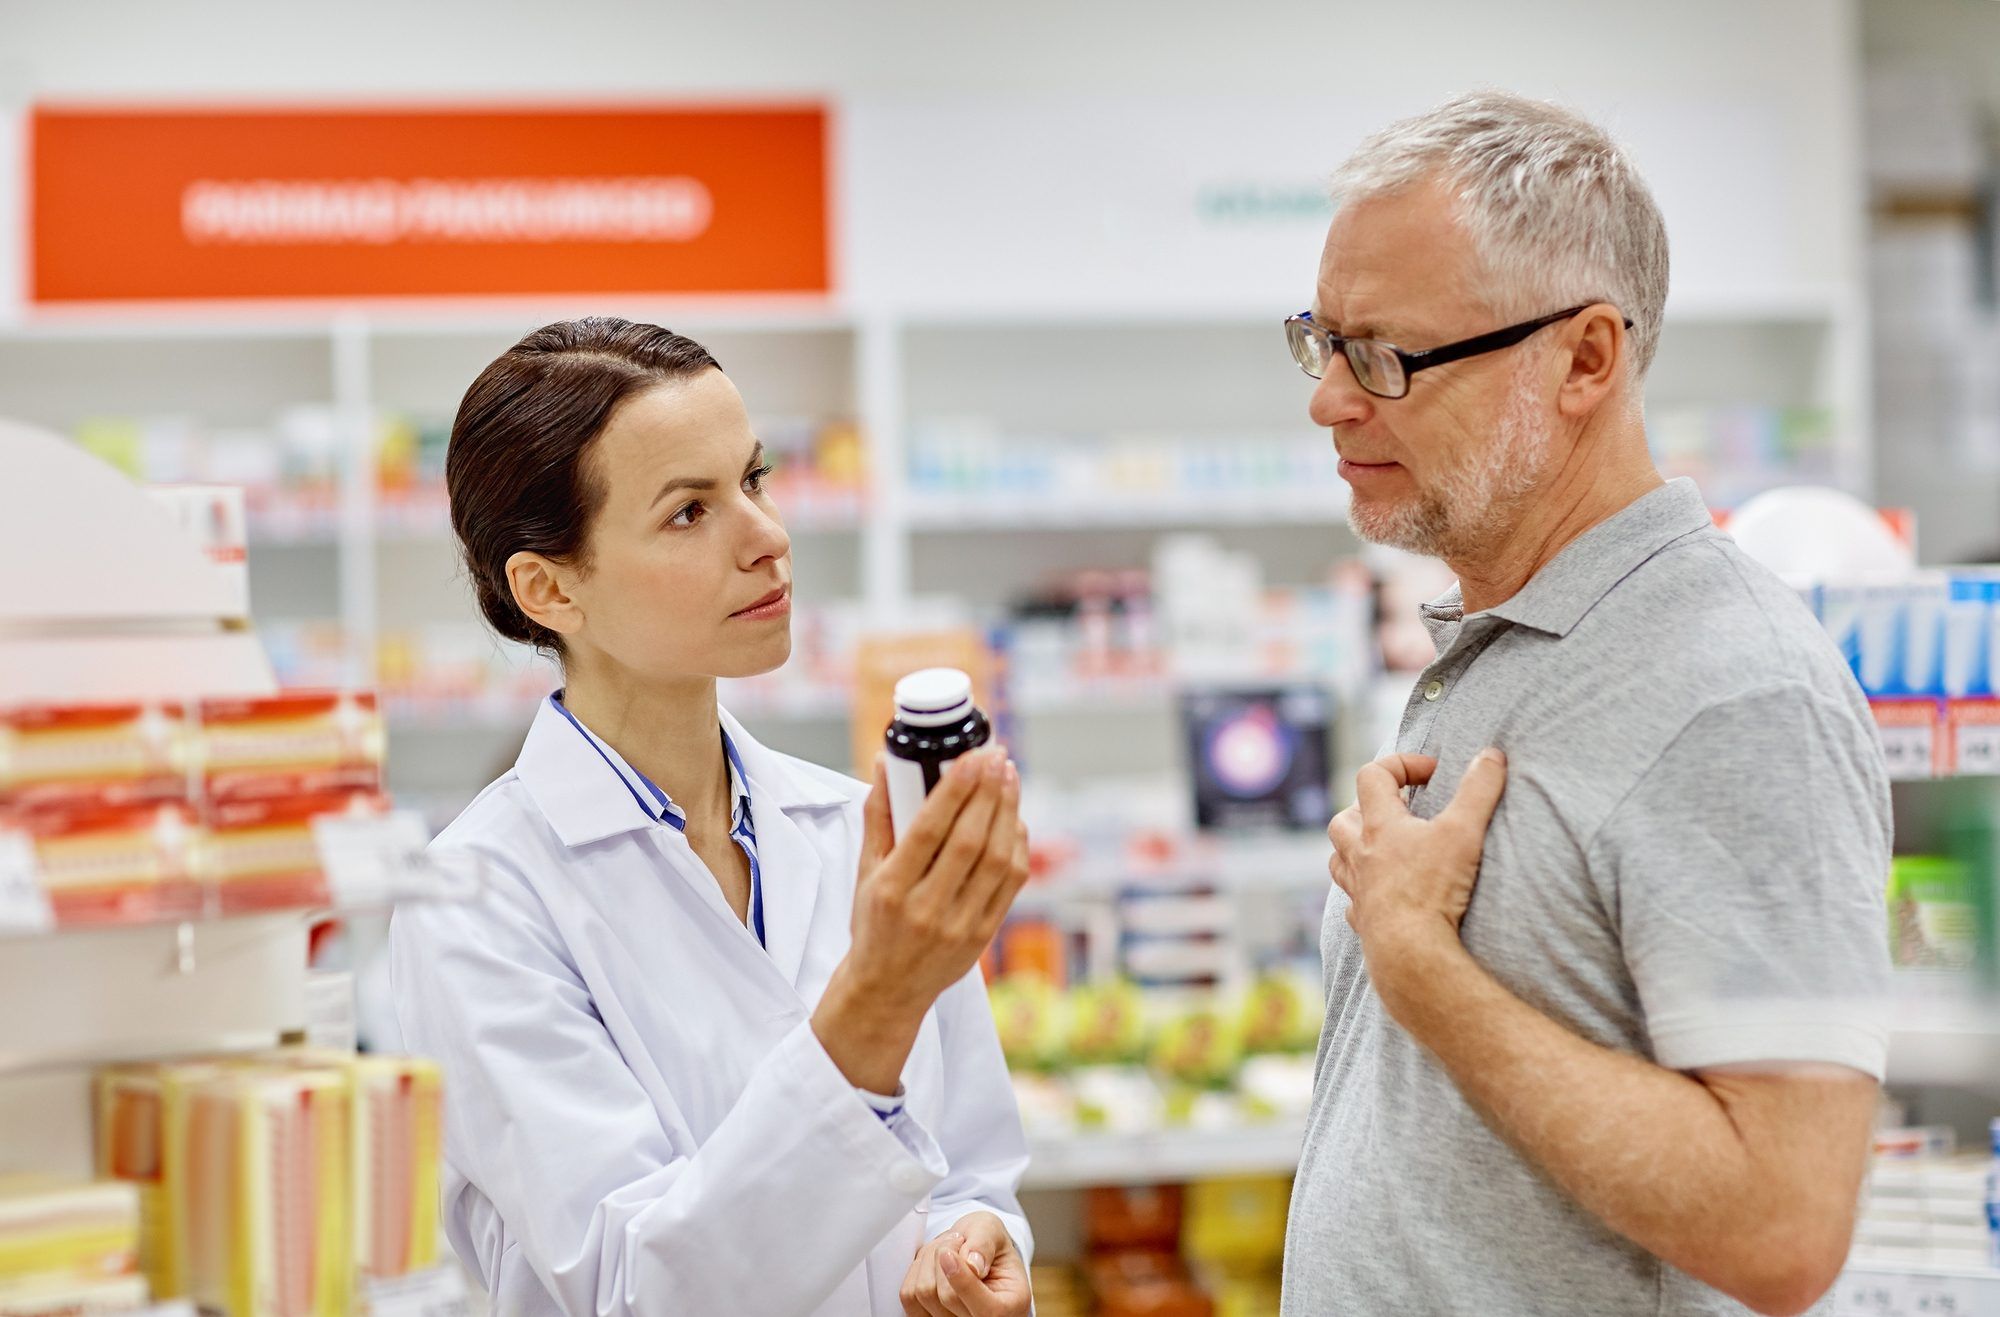 pharmacist helping male patient with medication